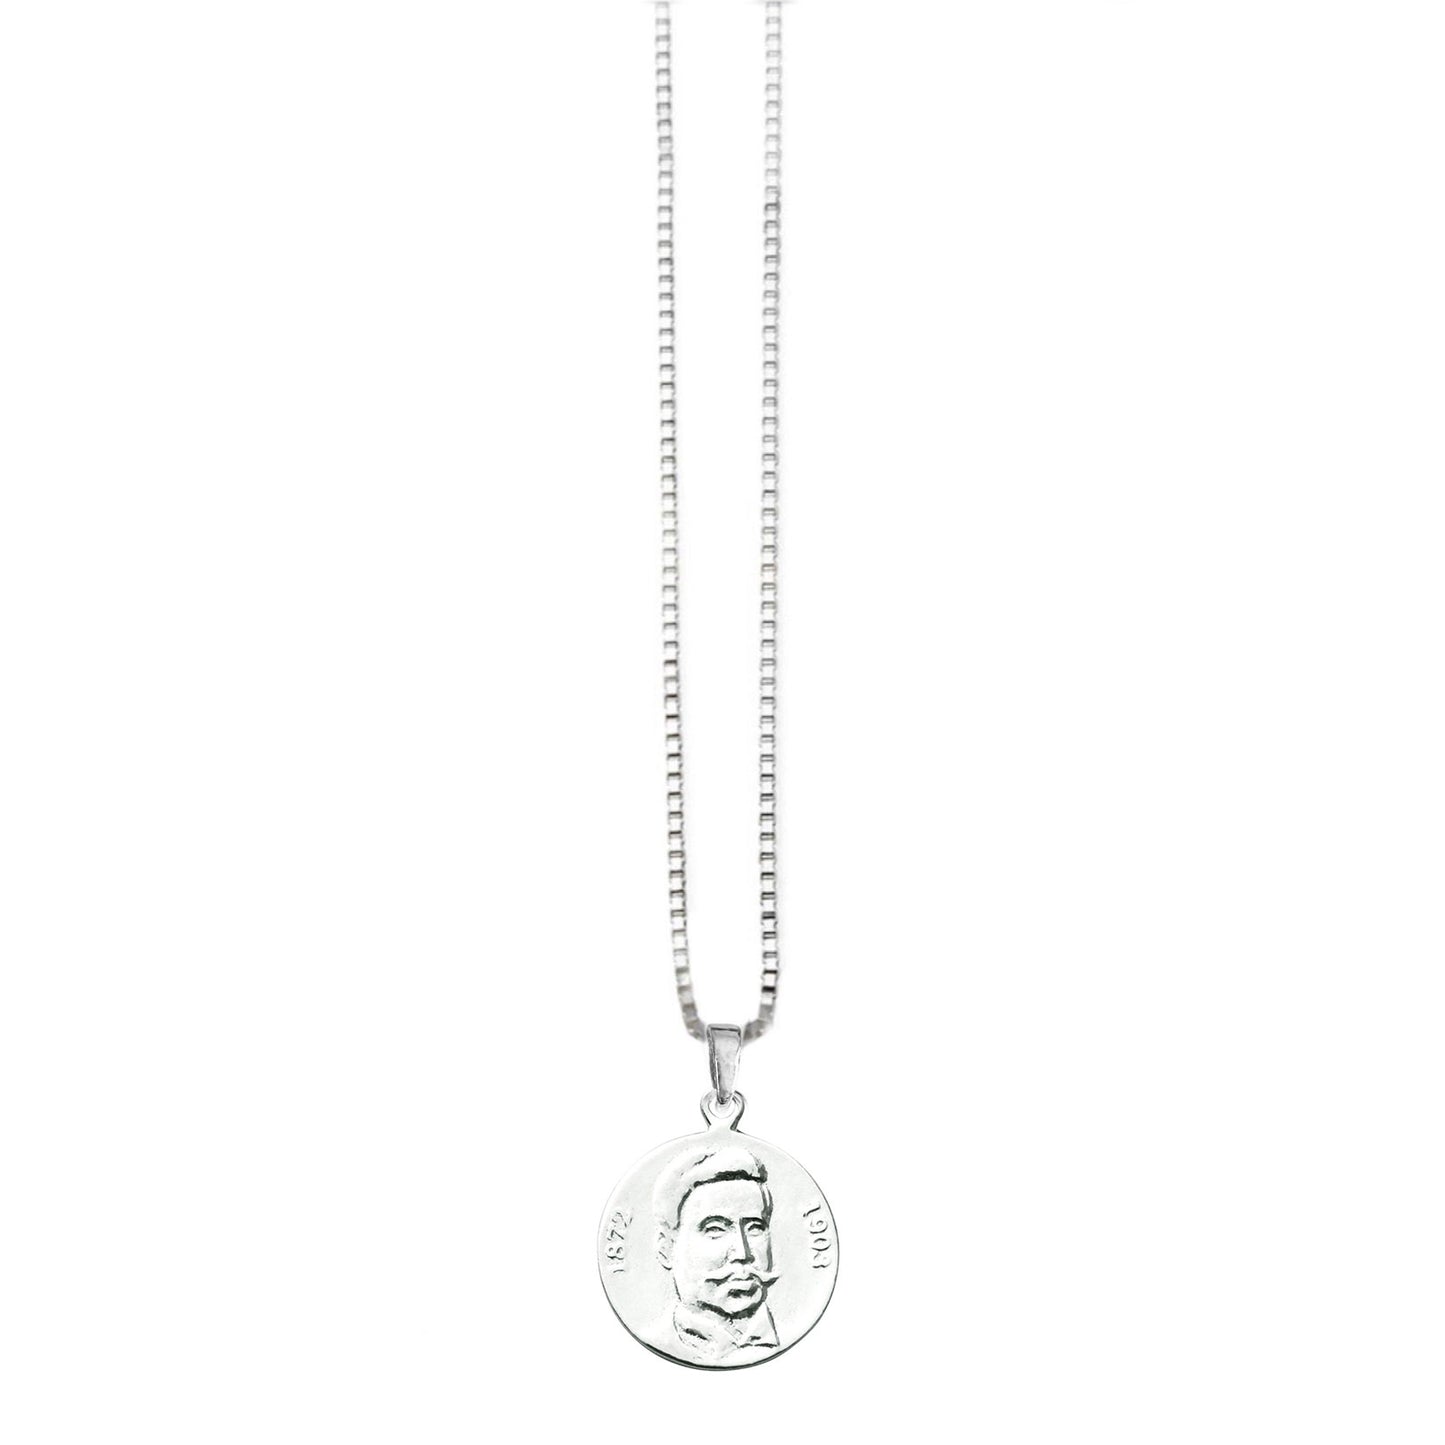 Mila Necklace with Delcev Charm